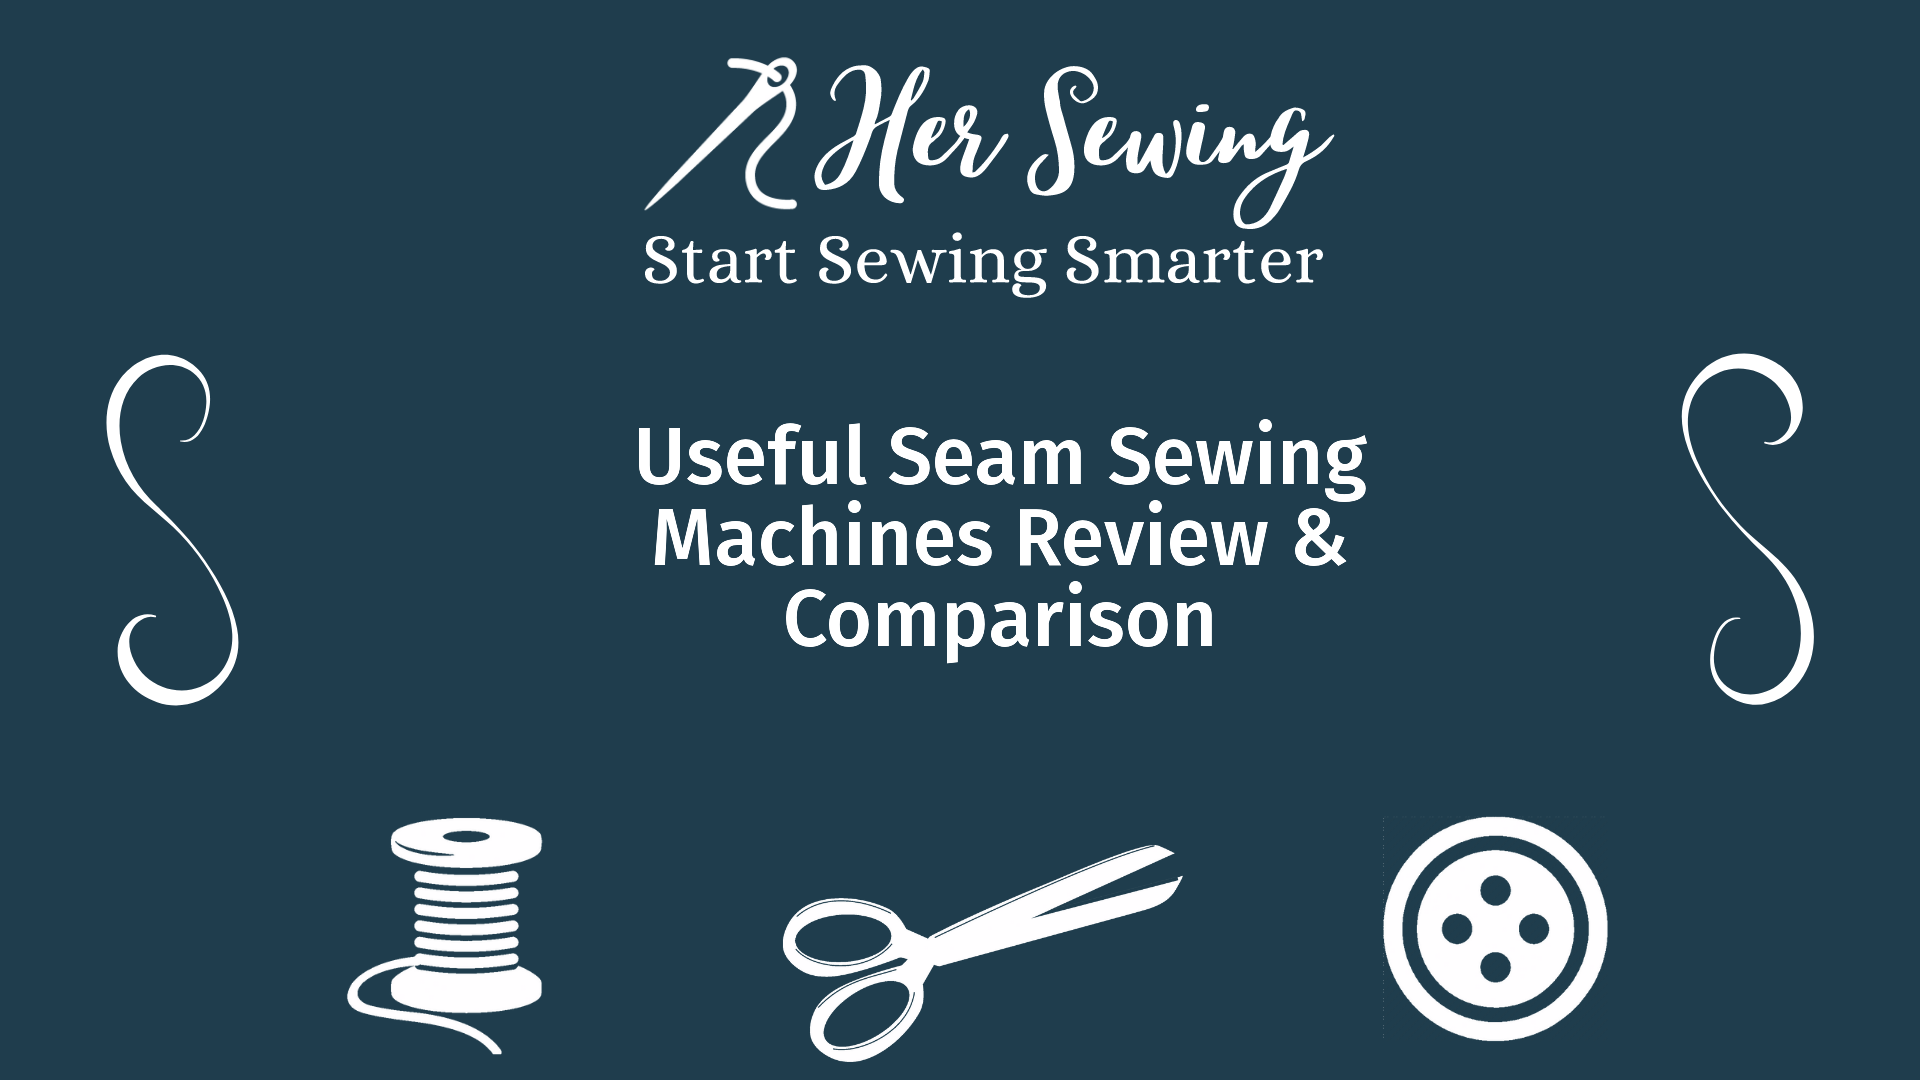 Useful Seam Sewing Machines Review & Comparison